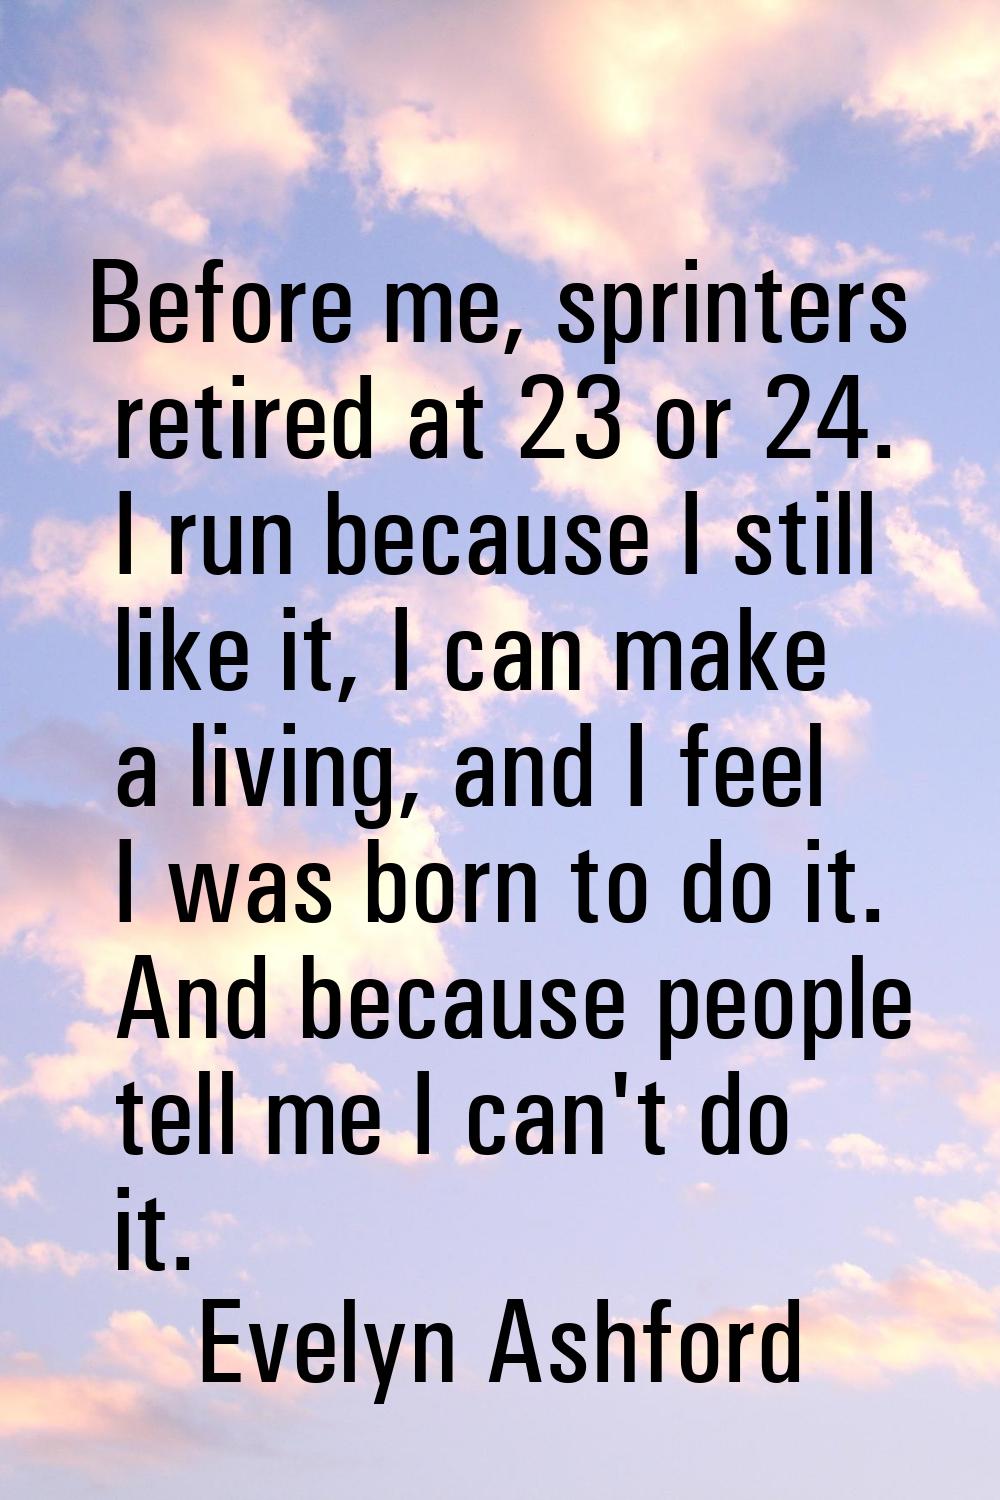 Before me, sprinters retired at 23 or 24. I run because I still like it, I can make a living, and I